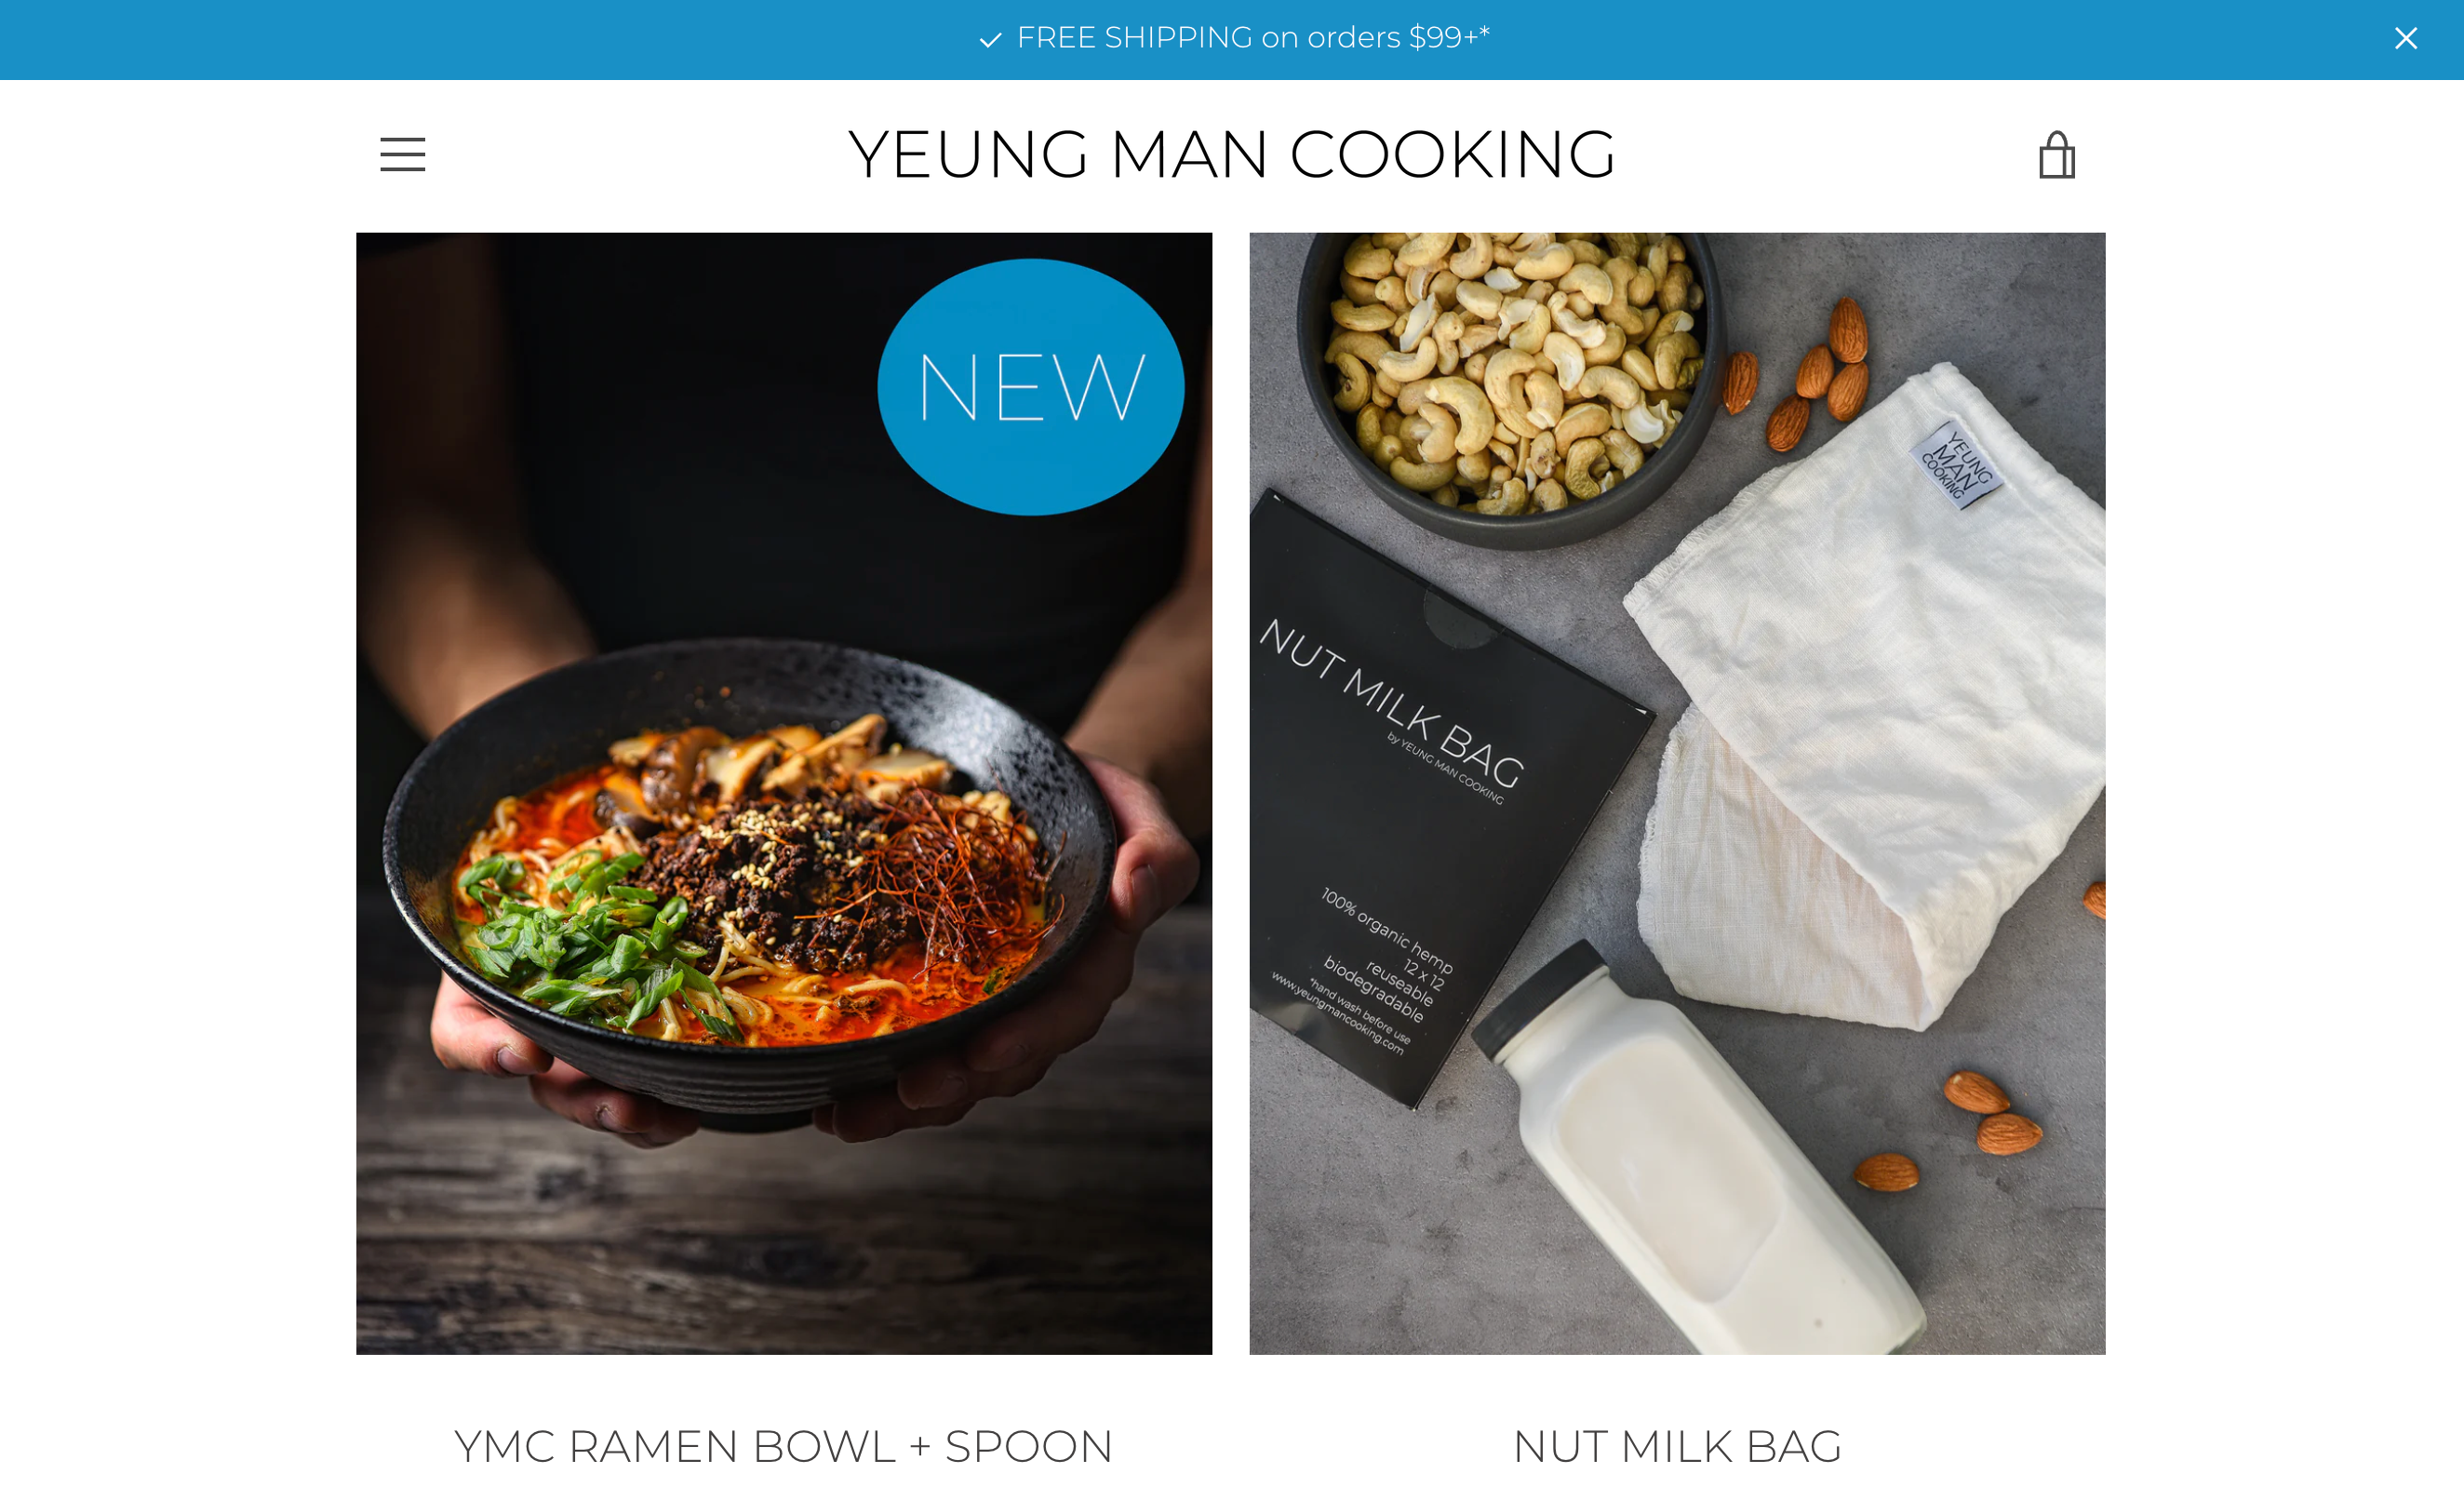 Homepage for Shopify-powered ecommerce store Yeung Man Cooking